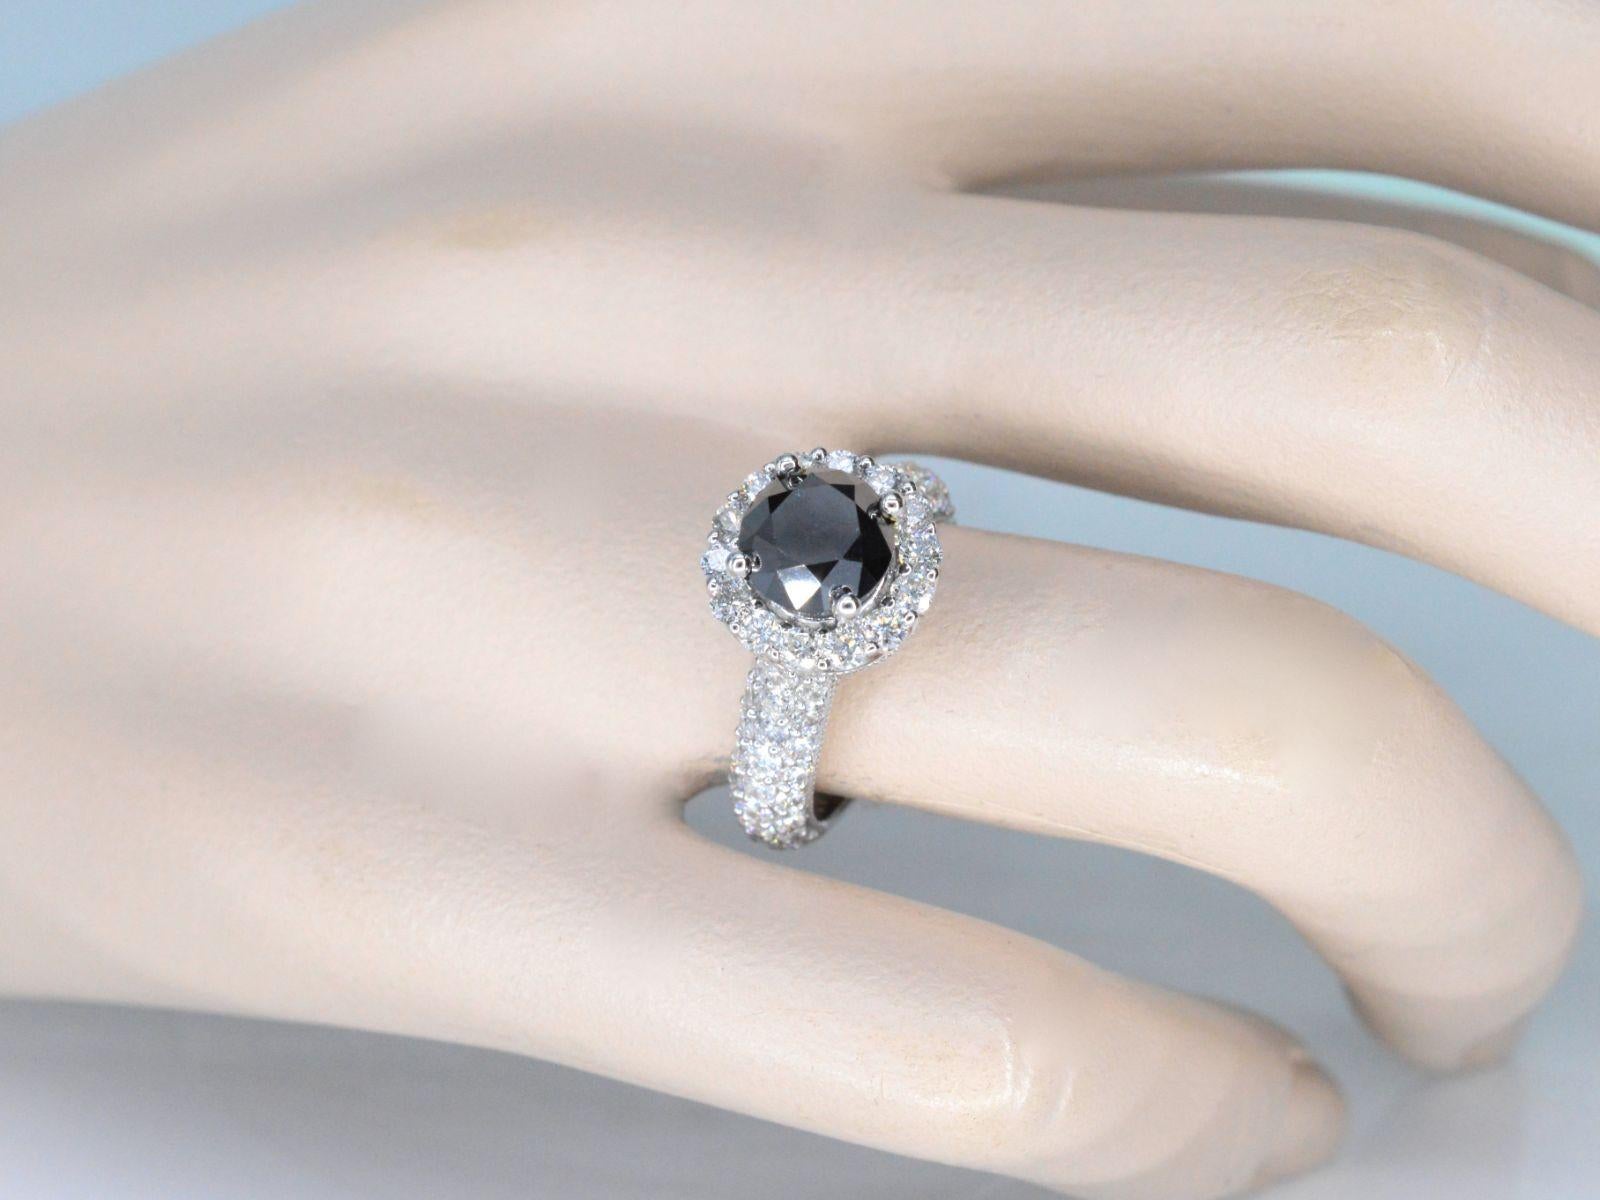 This exquisite white gold entourage ring boasts a stunning combination of large diamonds and a bold black diamond as its centerpiece. The black diamond, with a weight of 2.50 carats and brilliant cut, is enhanced for maximum brilliance, while the